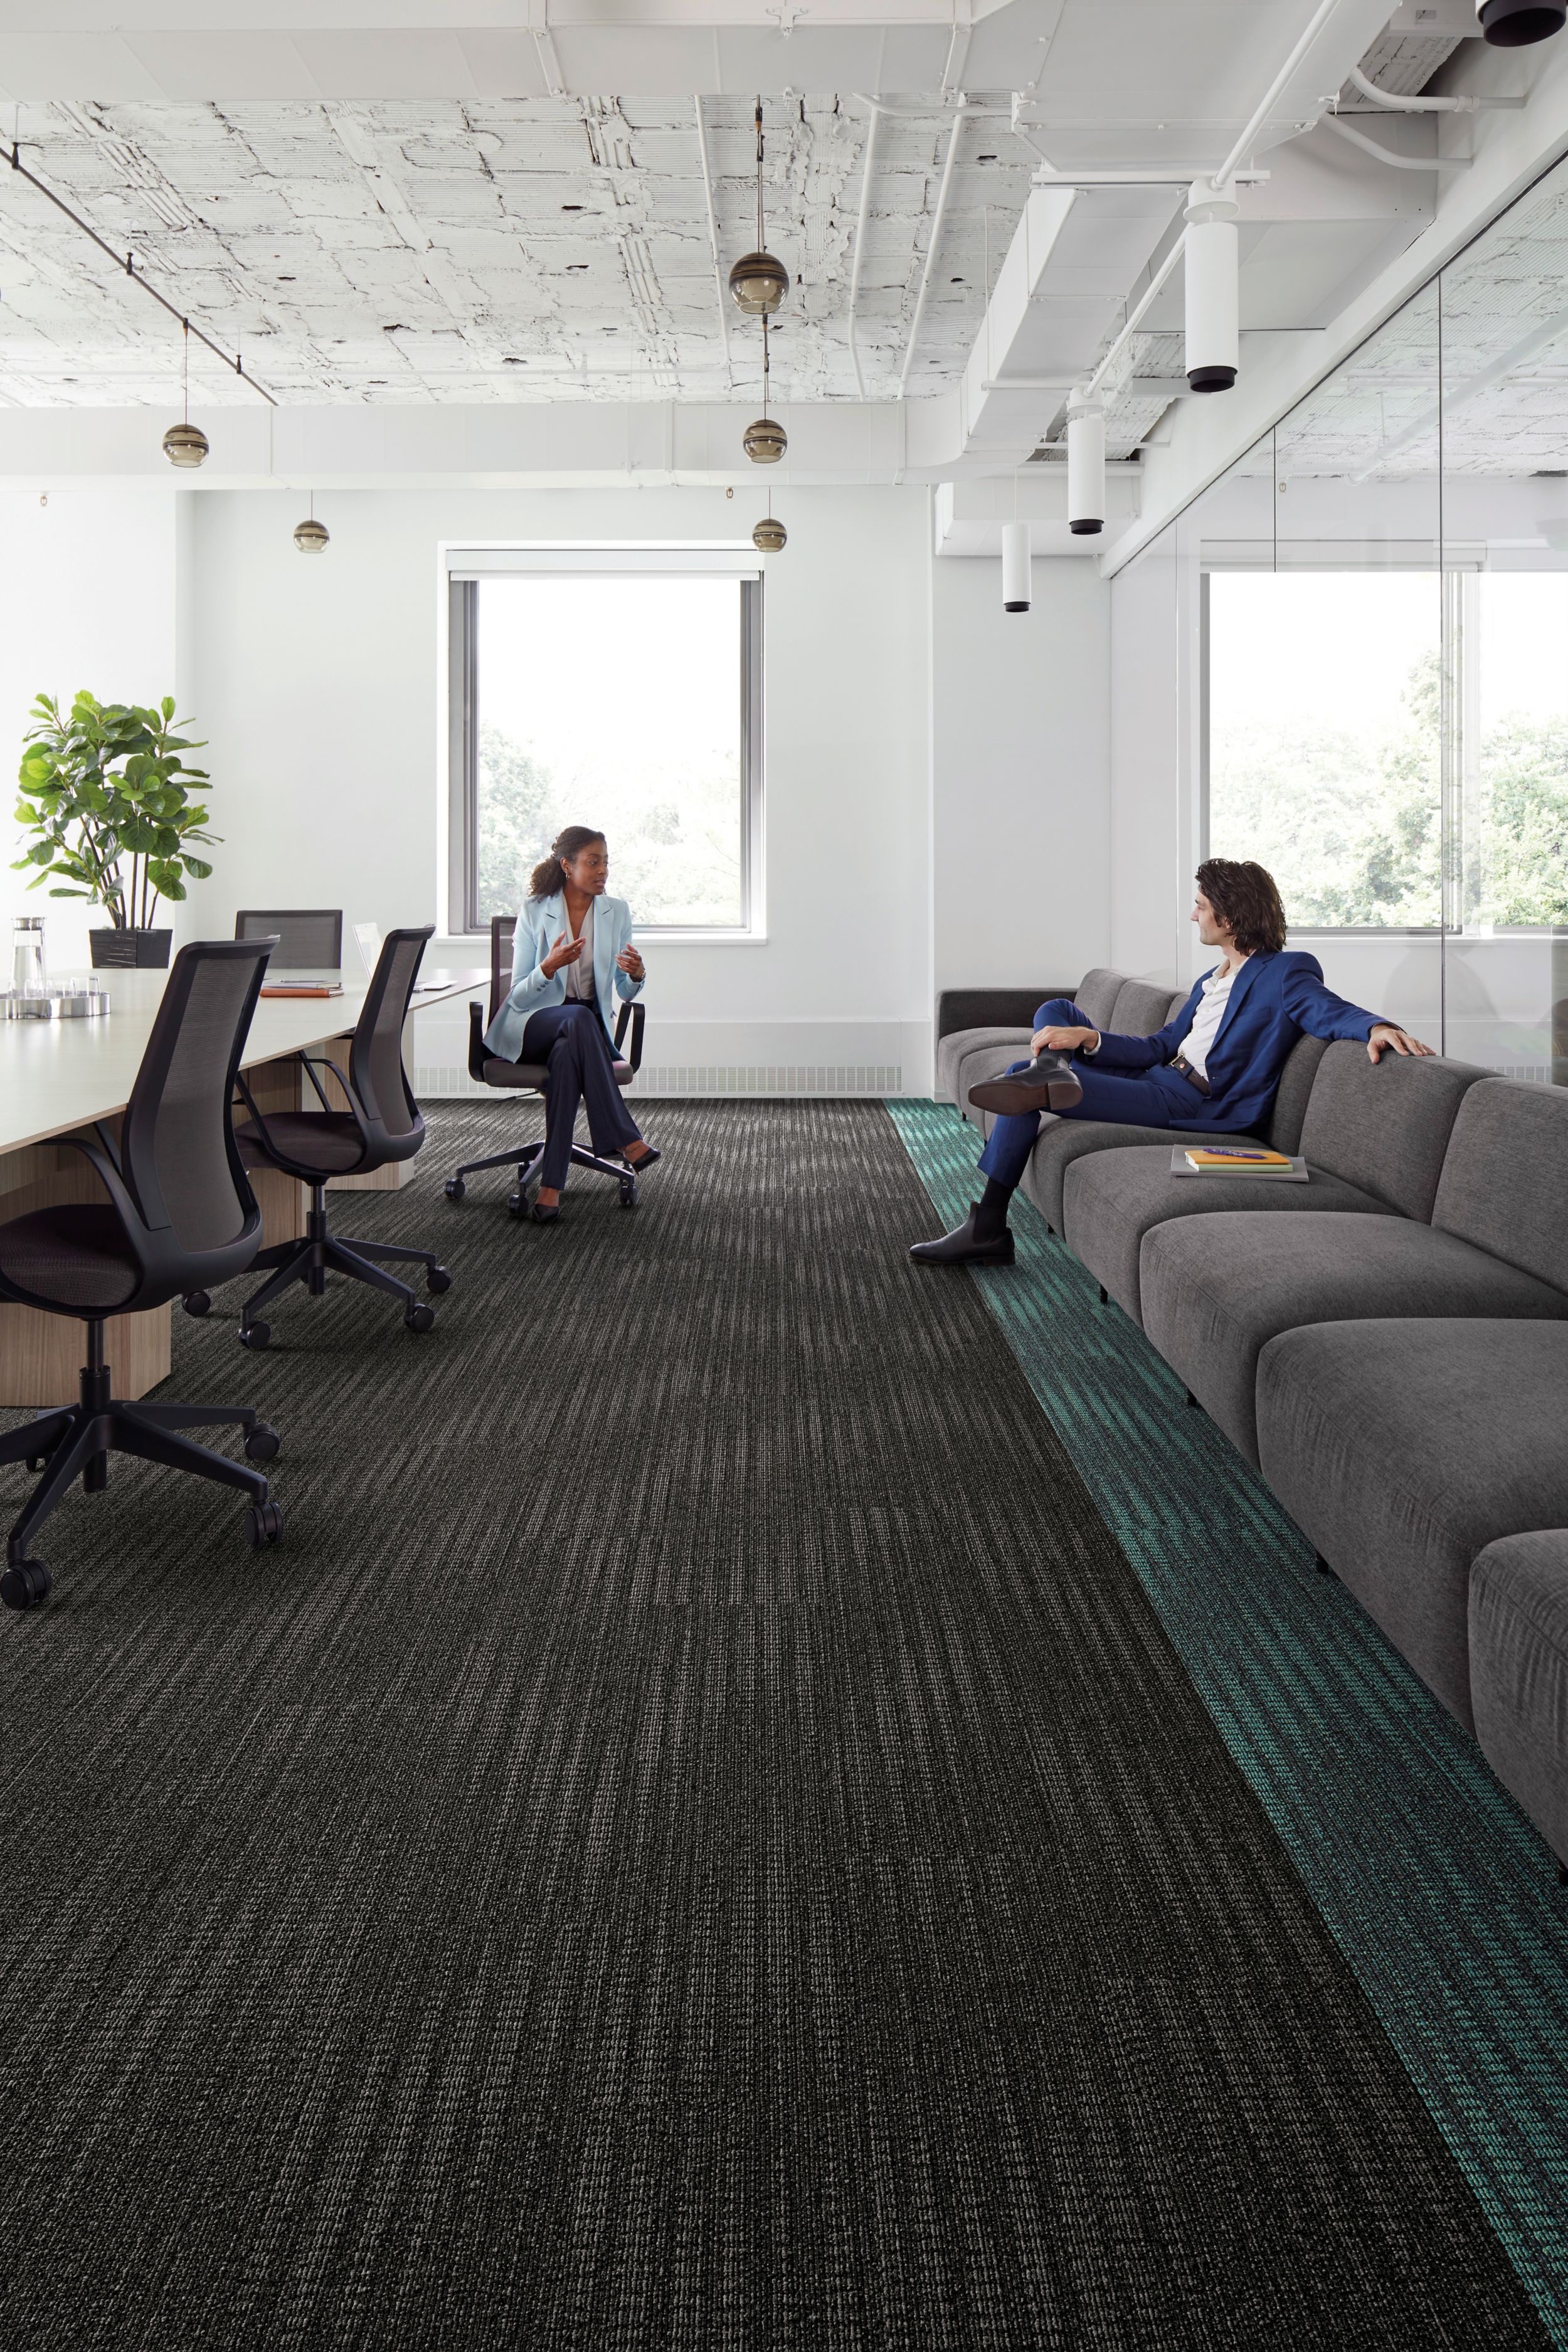 Interface Karmic Relief plank carpet tiles with man sitting on couch collaborating with woman in office chair imagen número 5